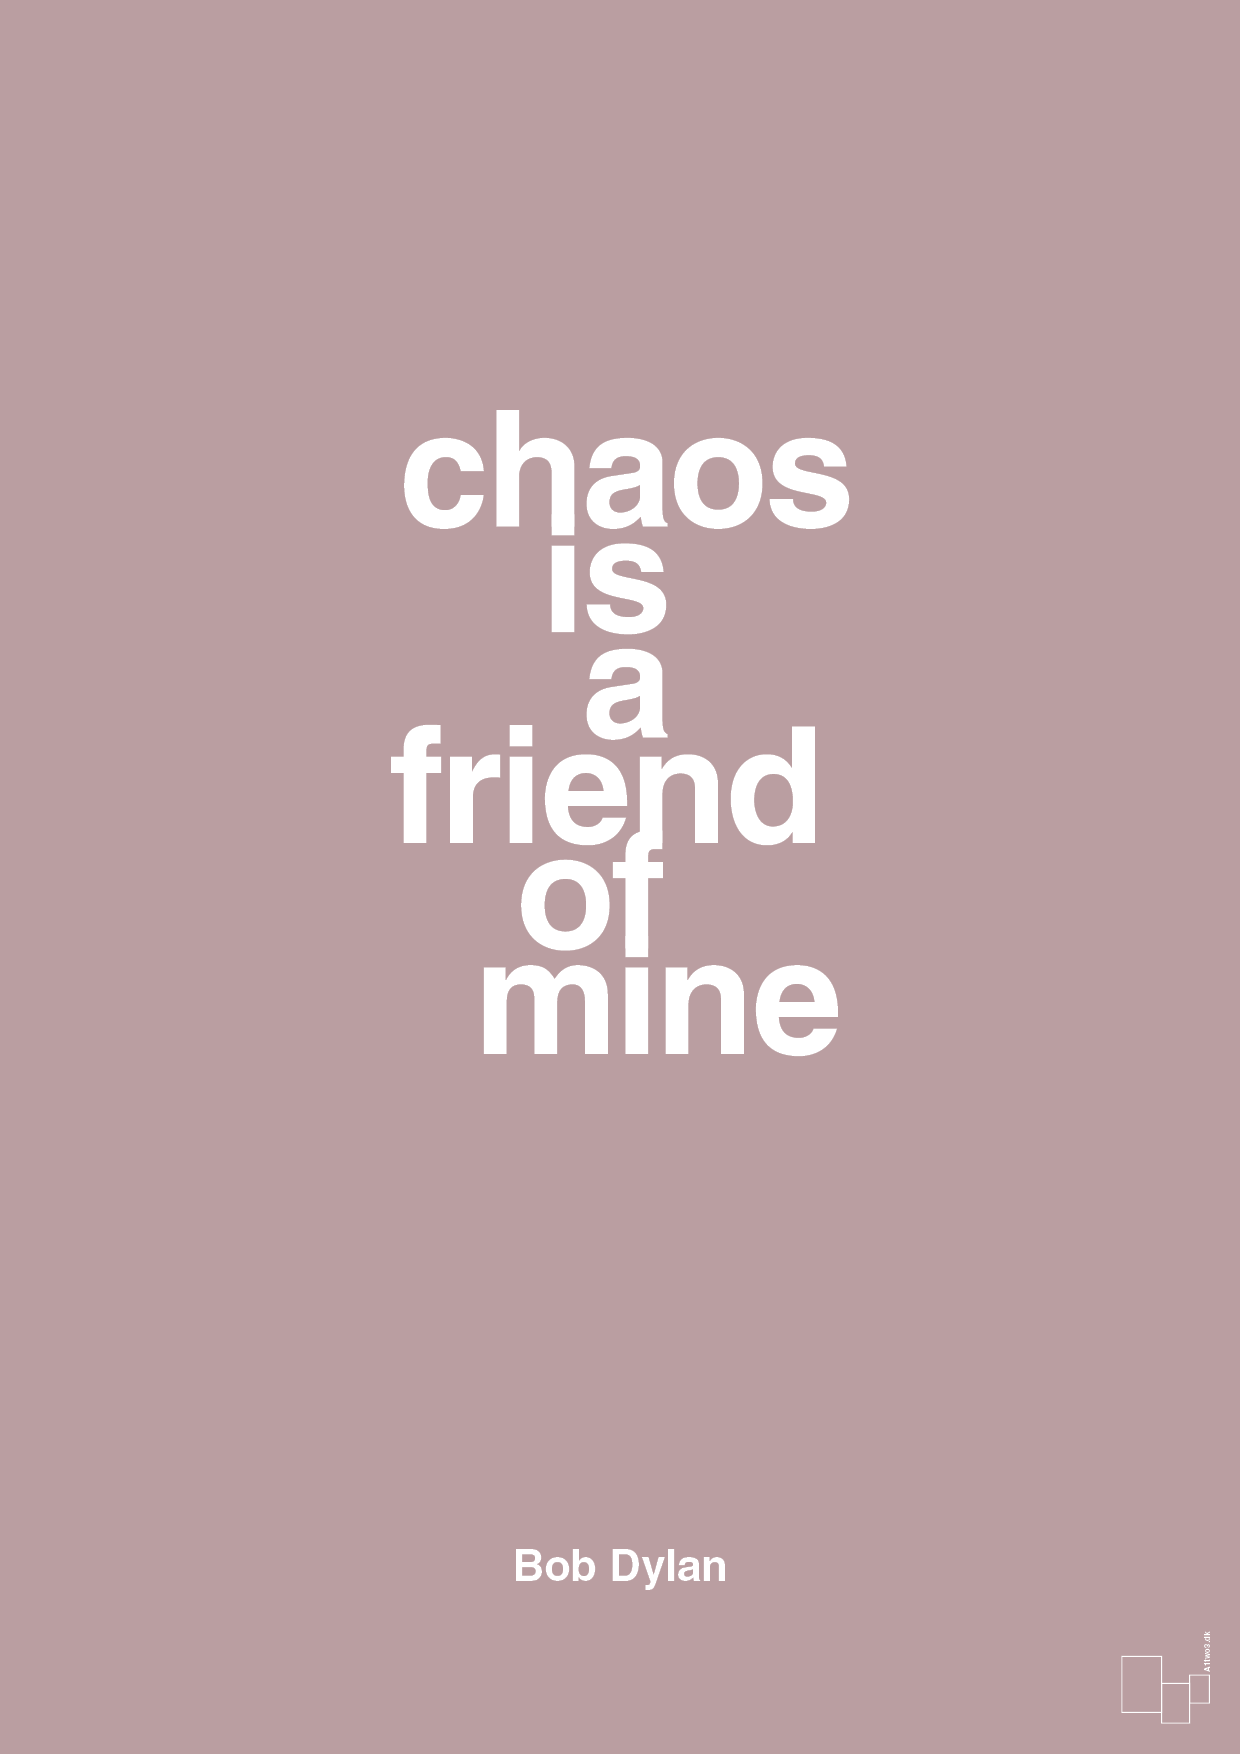 chaos is a friend of mine - Plakat med Citater i Light Rose